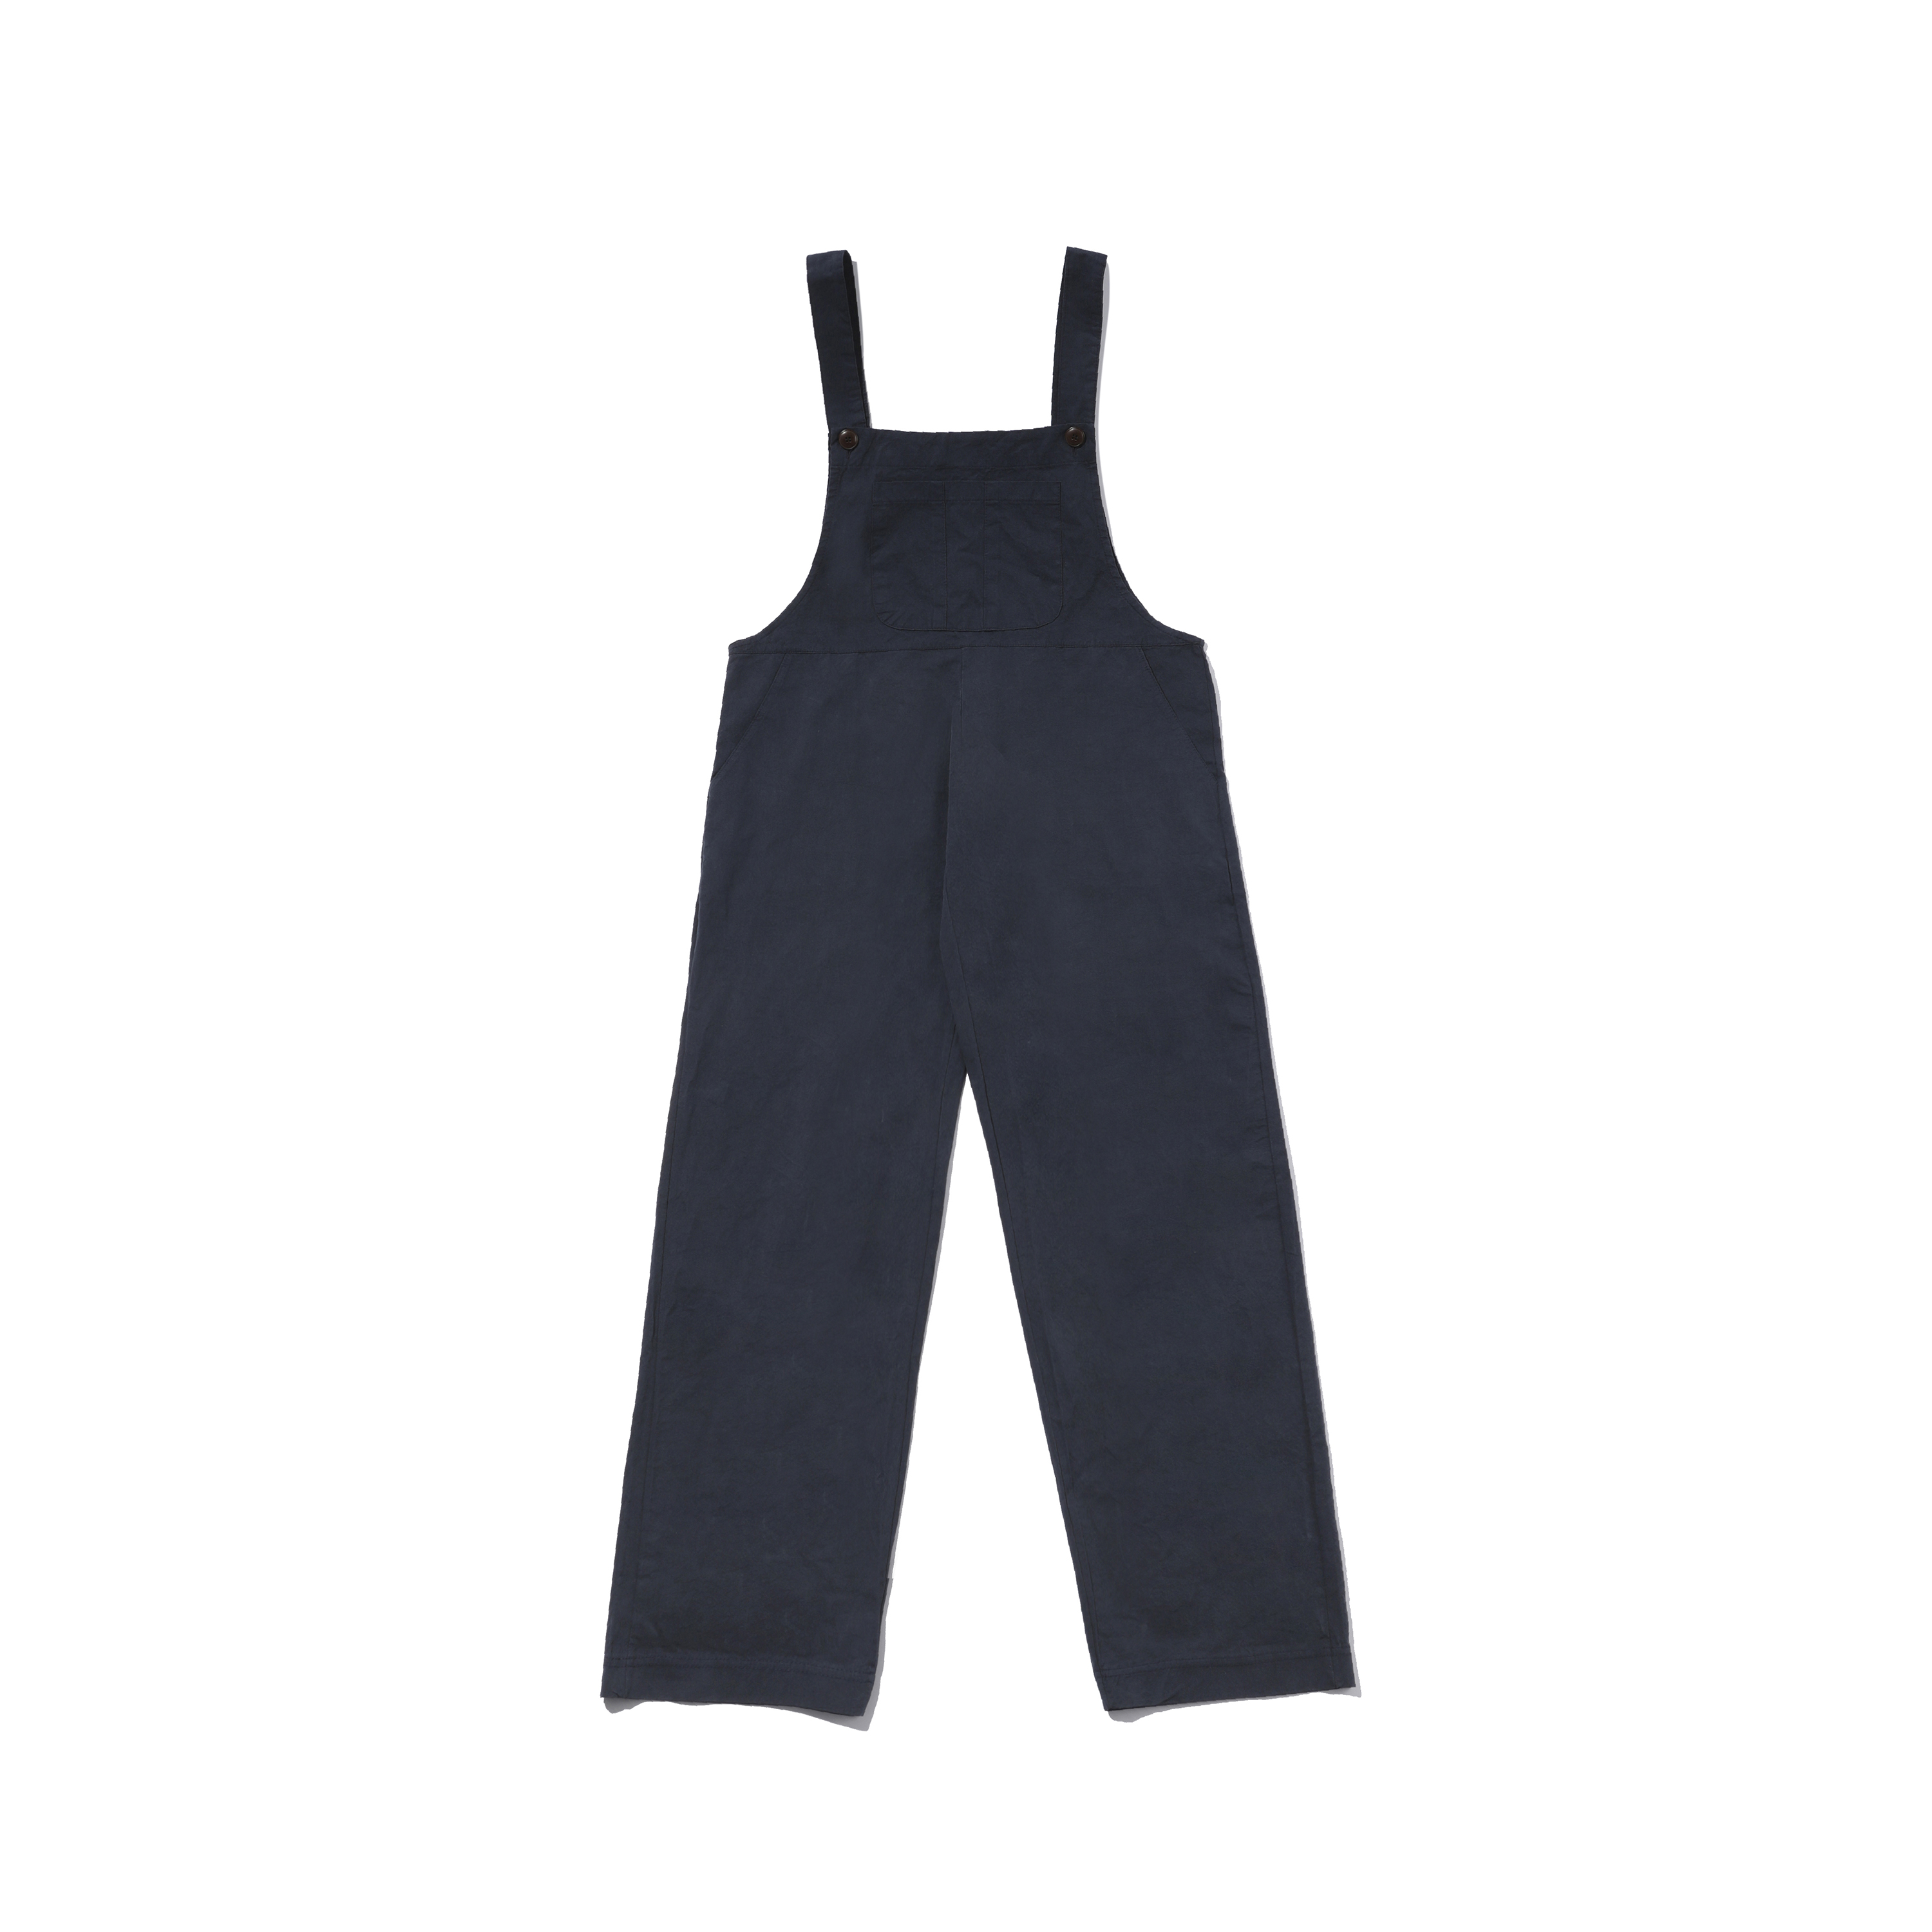 Washed cotton overall navy